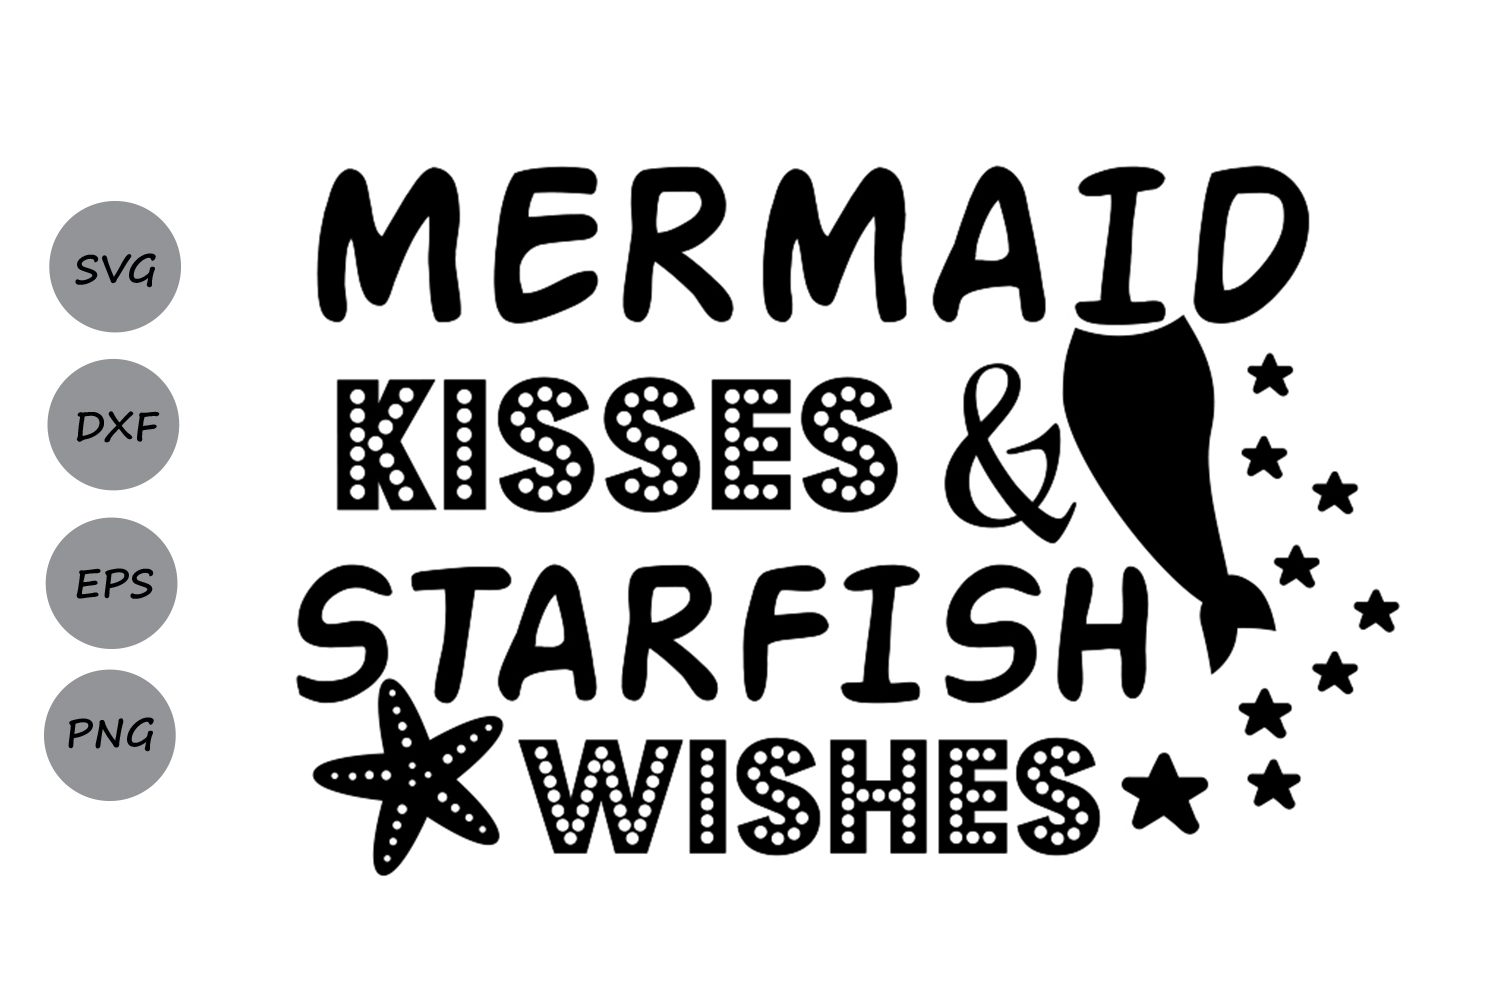 Free Free 262 Mermaid Kisses Starfish Wishes Svg SVG PNG EPS DXF File